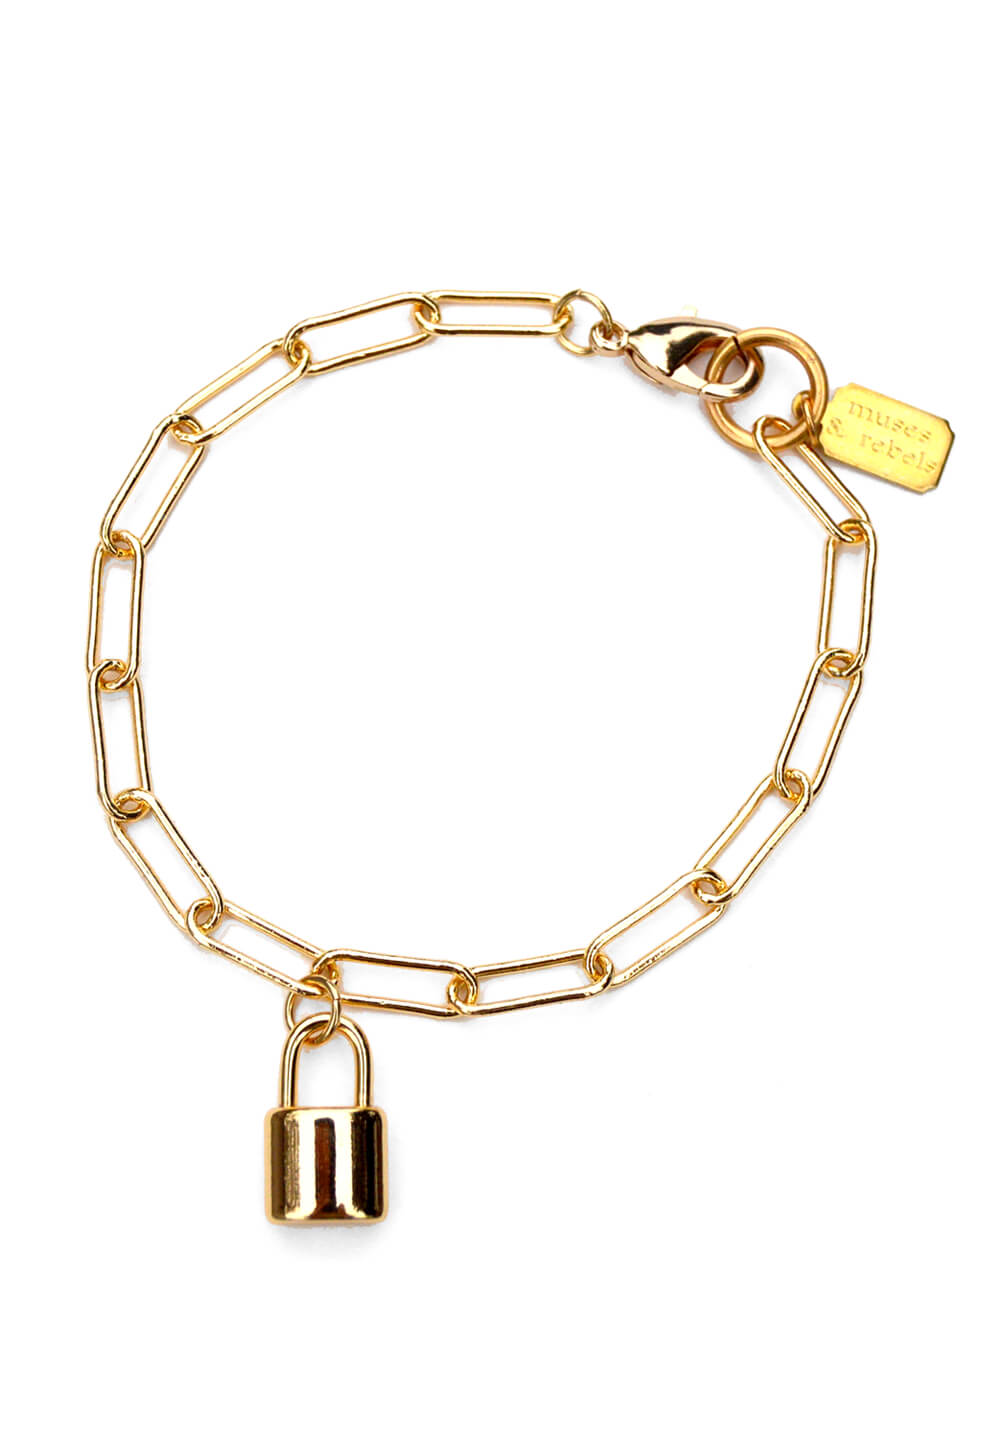 10k Solid Yellow Gold Chino ID Bracelet Size 8.5